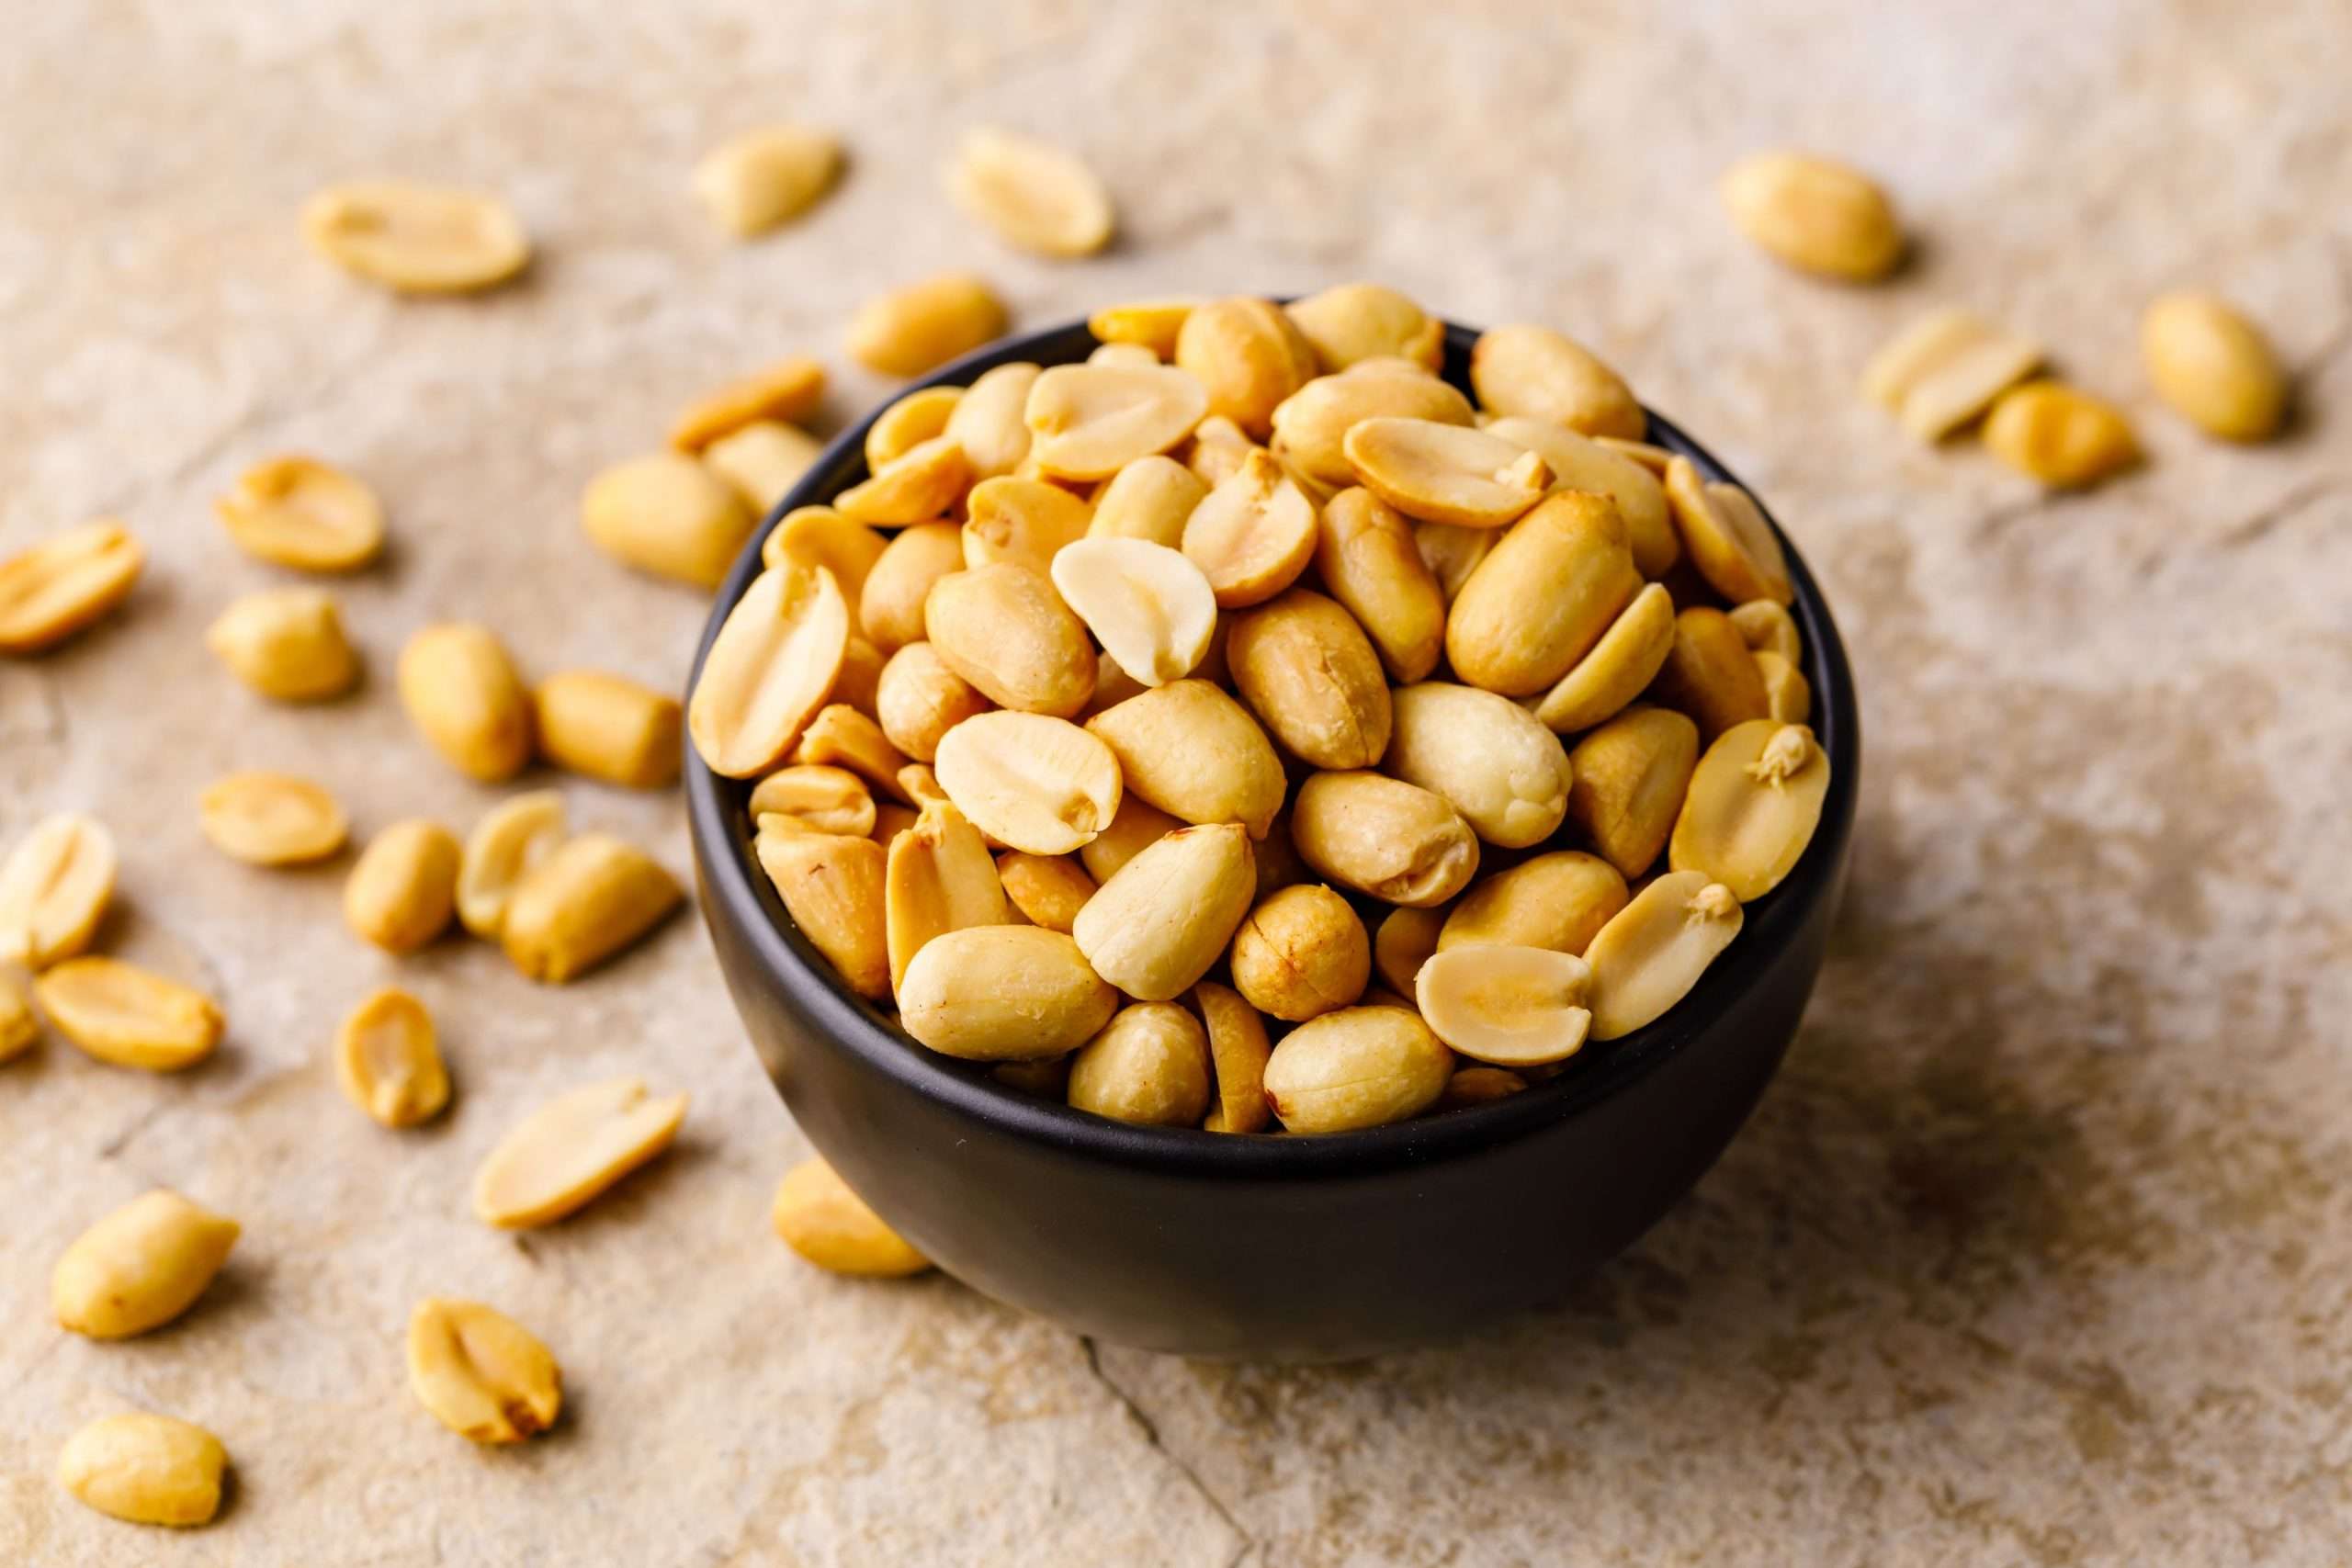 Can You Develop an Allergic Reaction Just By Smelling Peanuts?